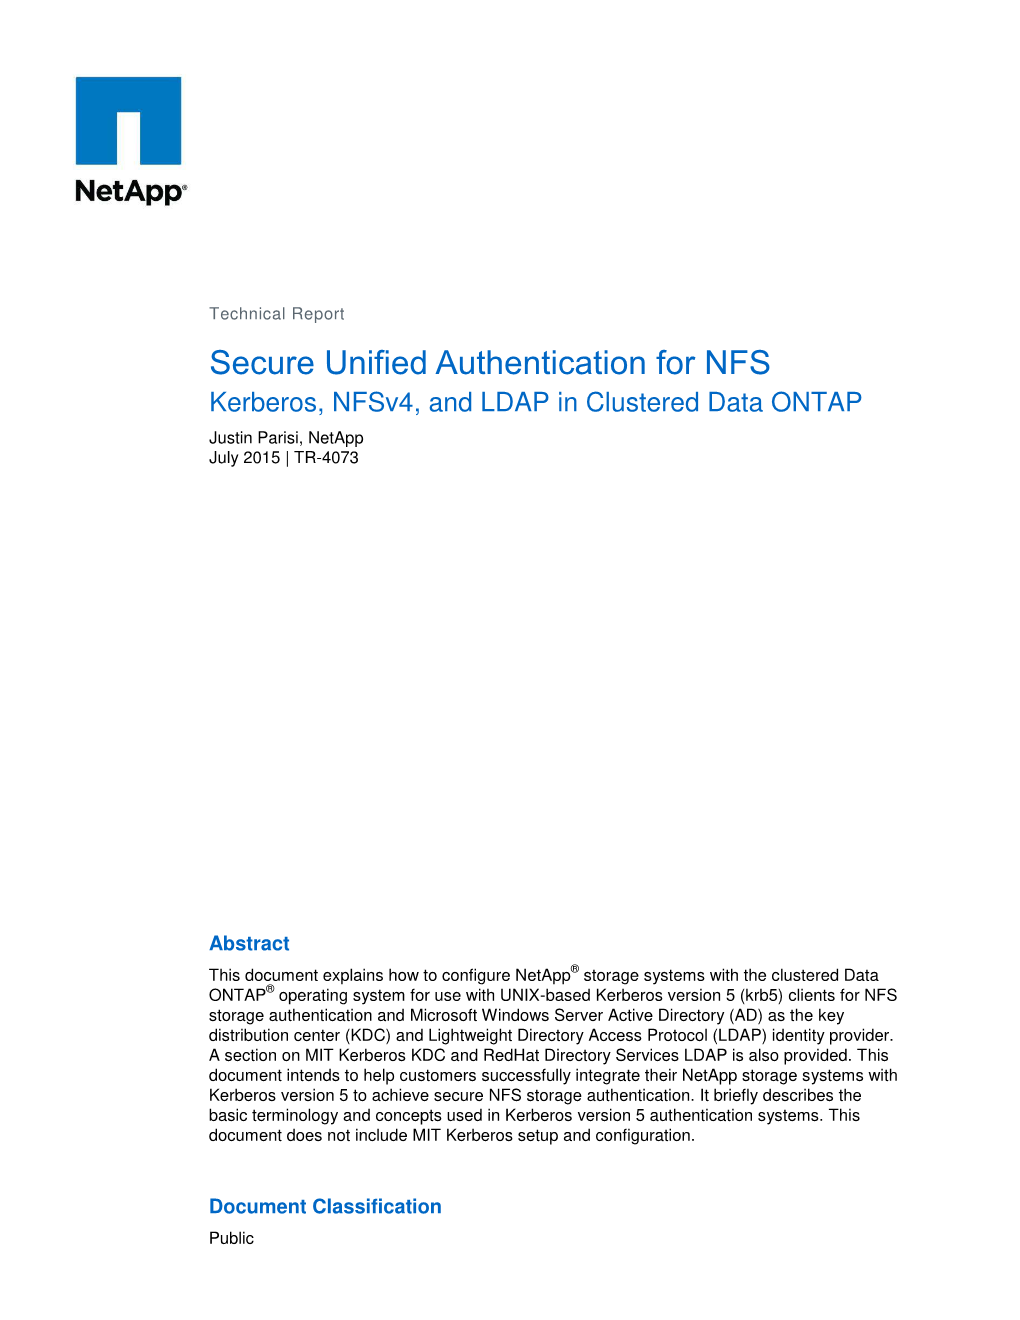 Secure Unified Authentication with Netapp Storage Systems © 2015 Netapp, Inc